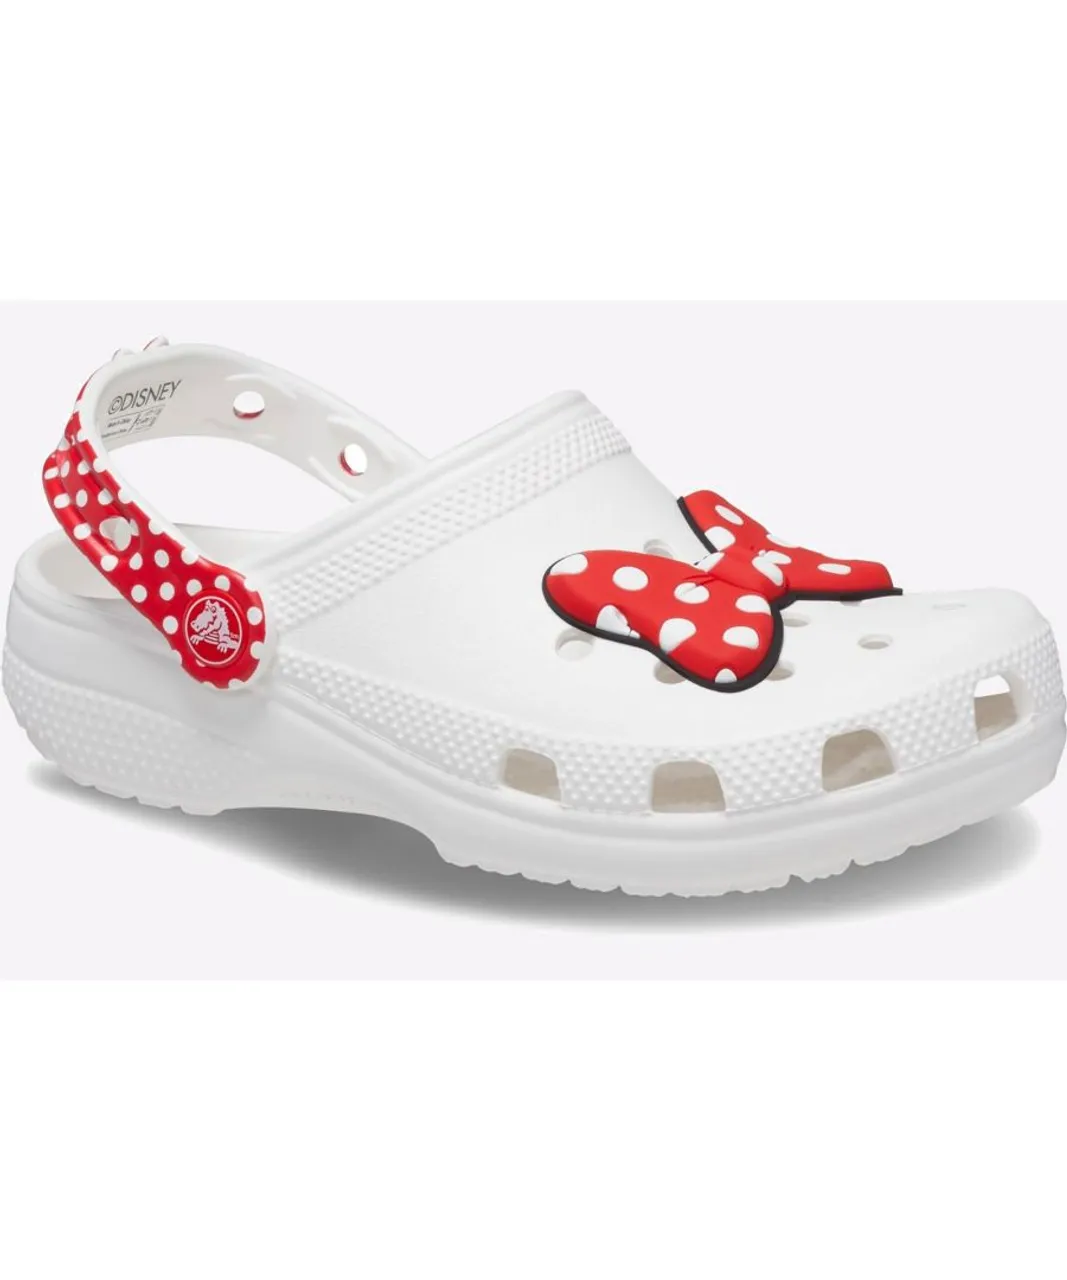 Crocs Baby Classic Disney Minnie Mouse Clogs Infants - White Mixed Material